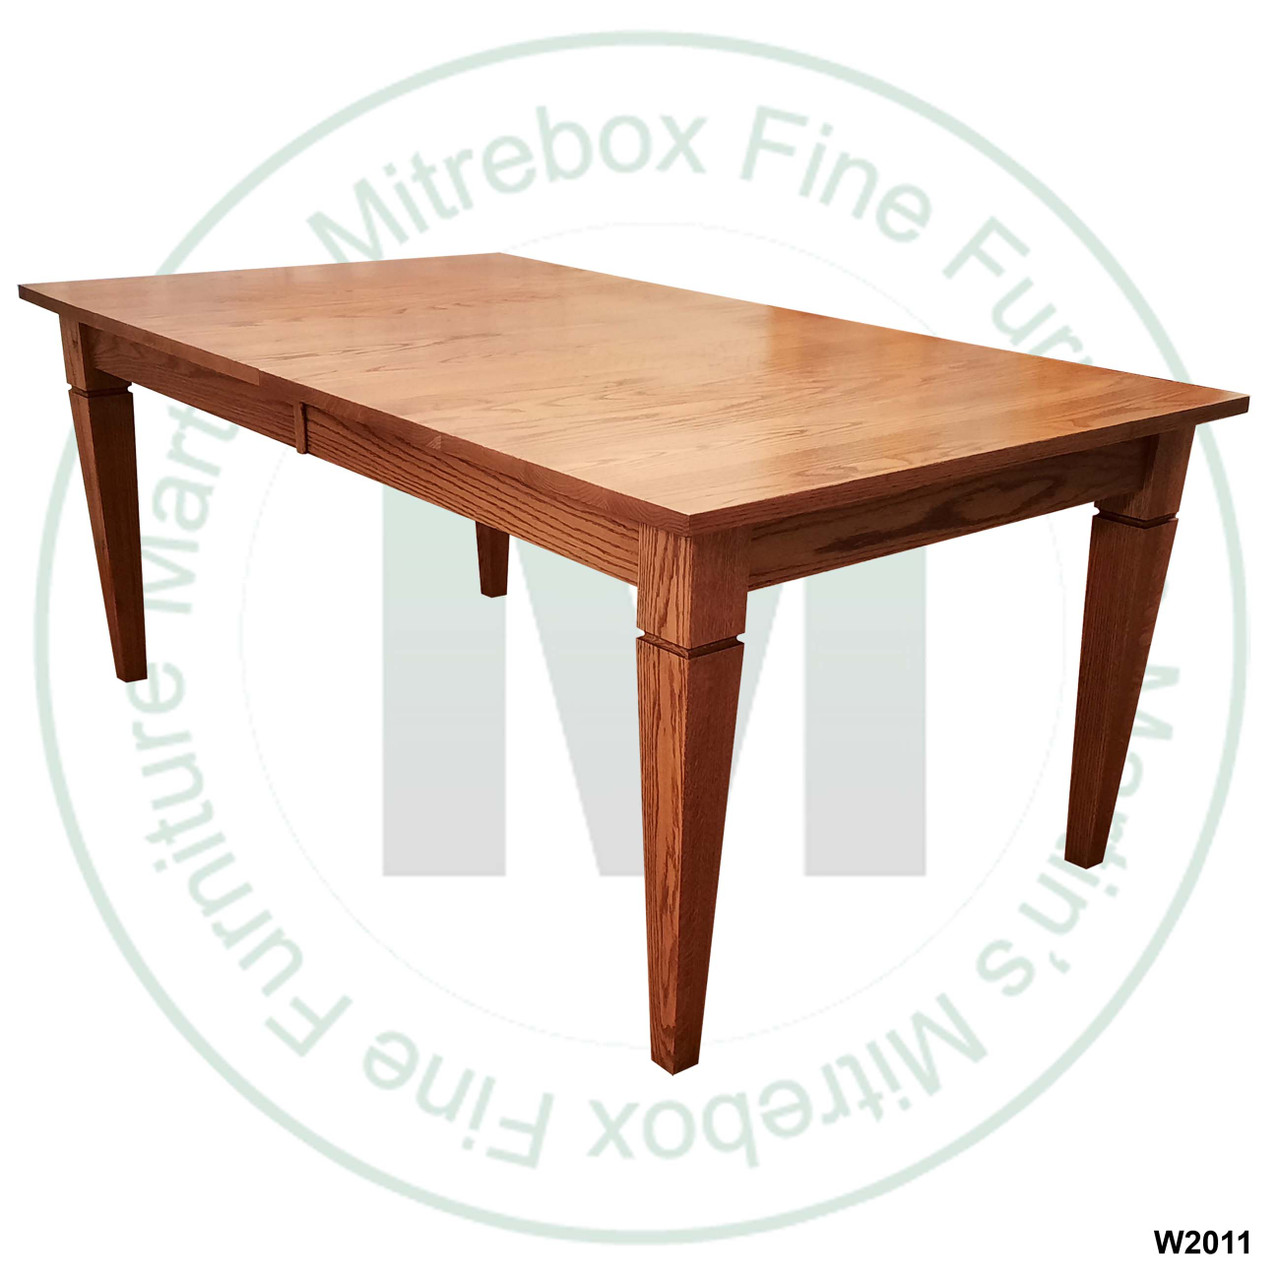 Oak Reesor Solid Top Harvest Table 36''D x 72''W x 30''H Table Has 1.25'' Thick Top And 2 - 16'' Extensions